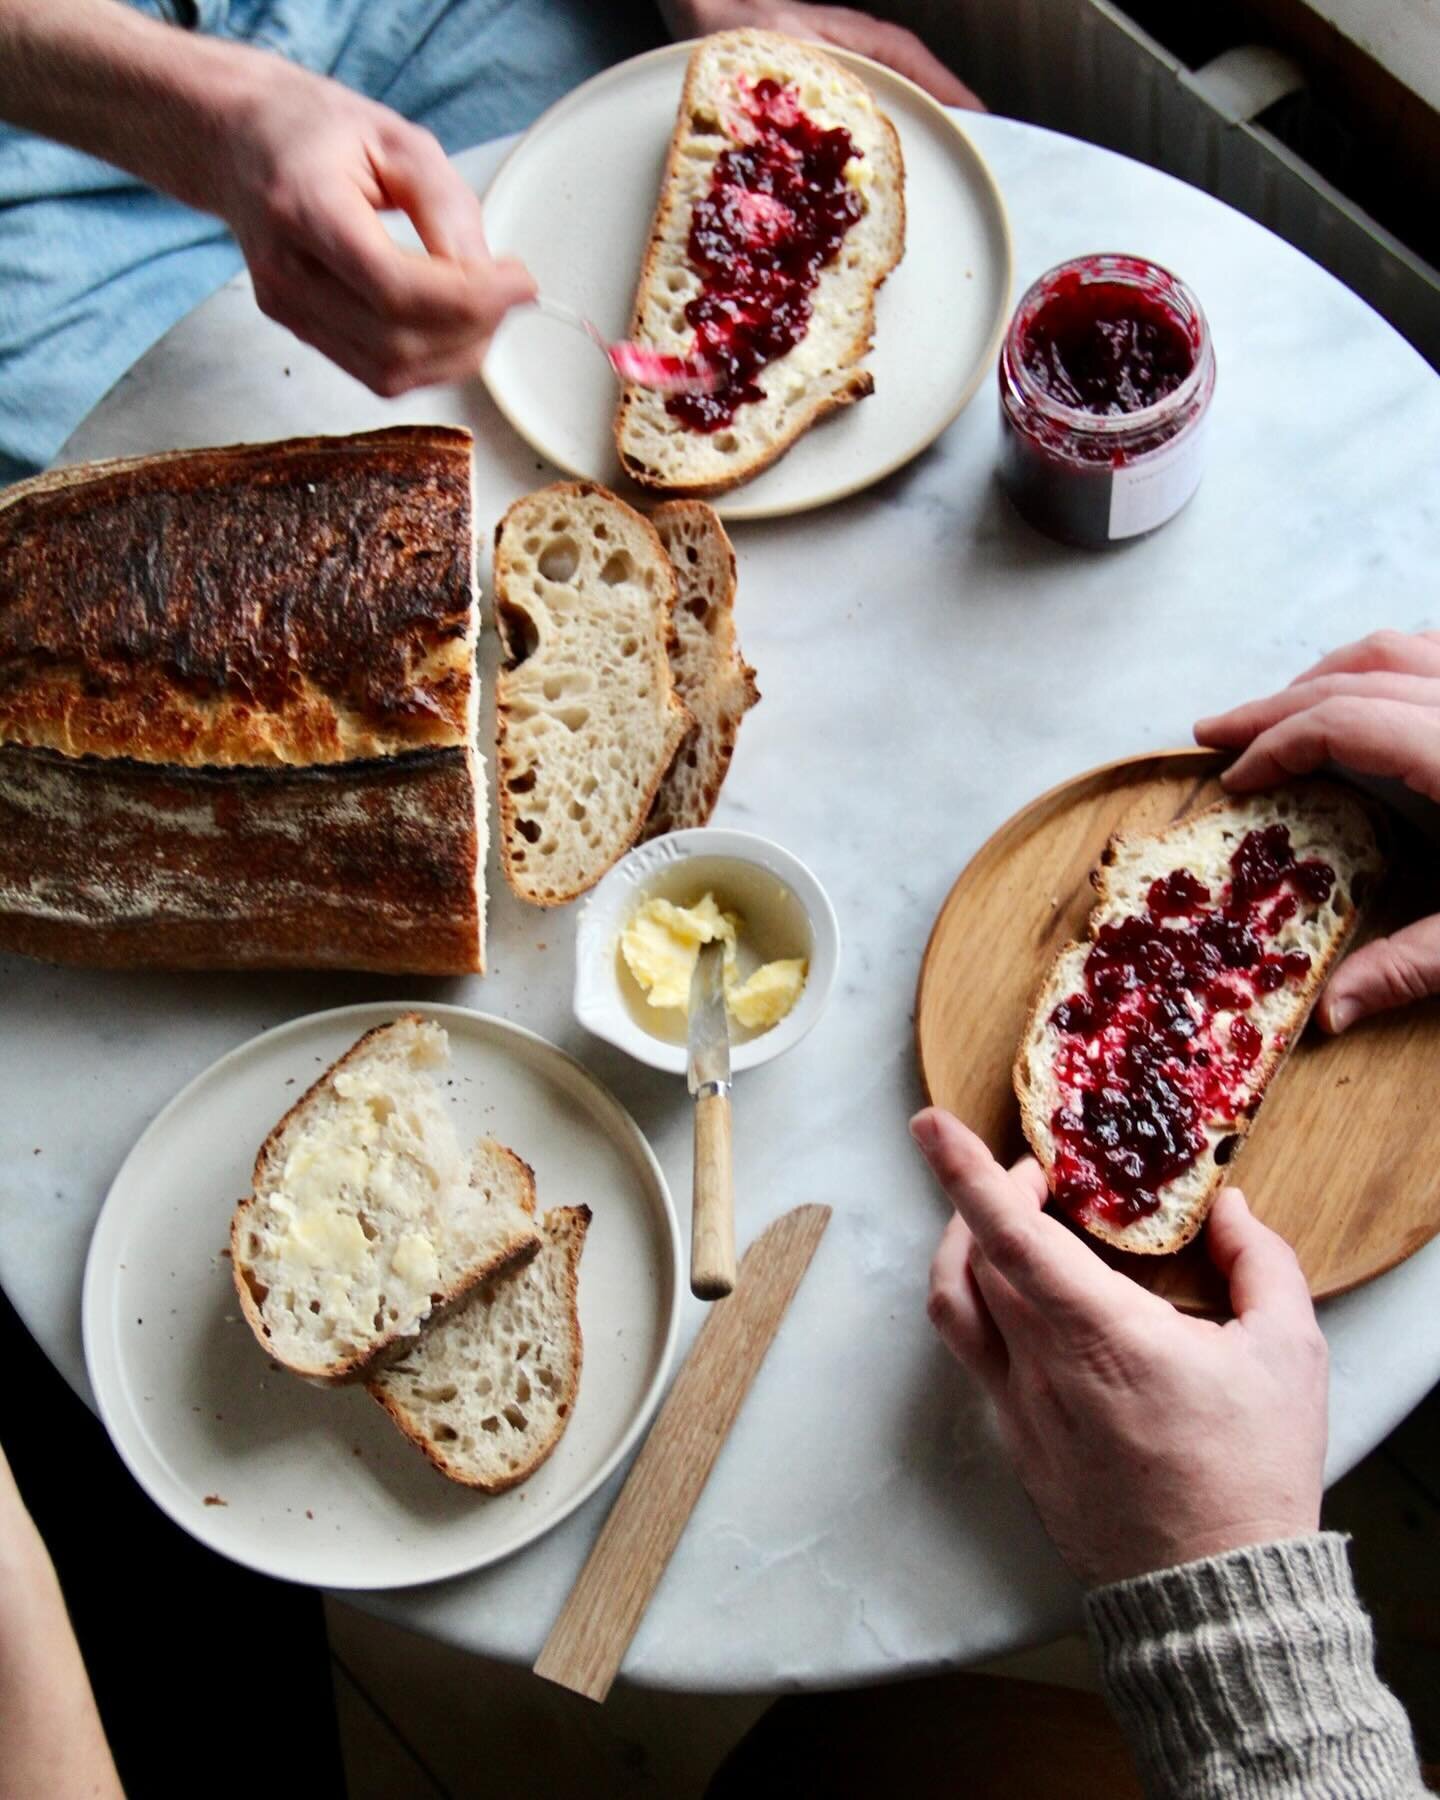 For the final Christmas week, we created a new bread, White Christmas Loaf. It&rsquo;s a super soft and light bread with an airy crumb and wonderfully thin crust.

We also made a batch of jam with locally sourced lingonberries.

See you on Friday for